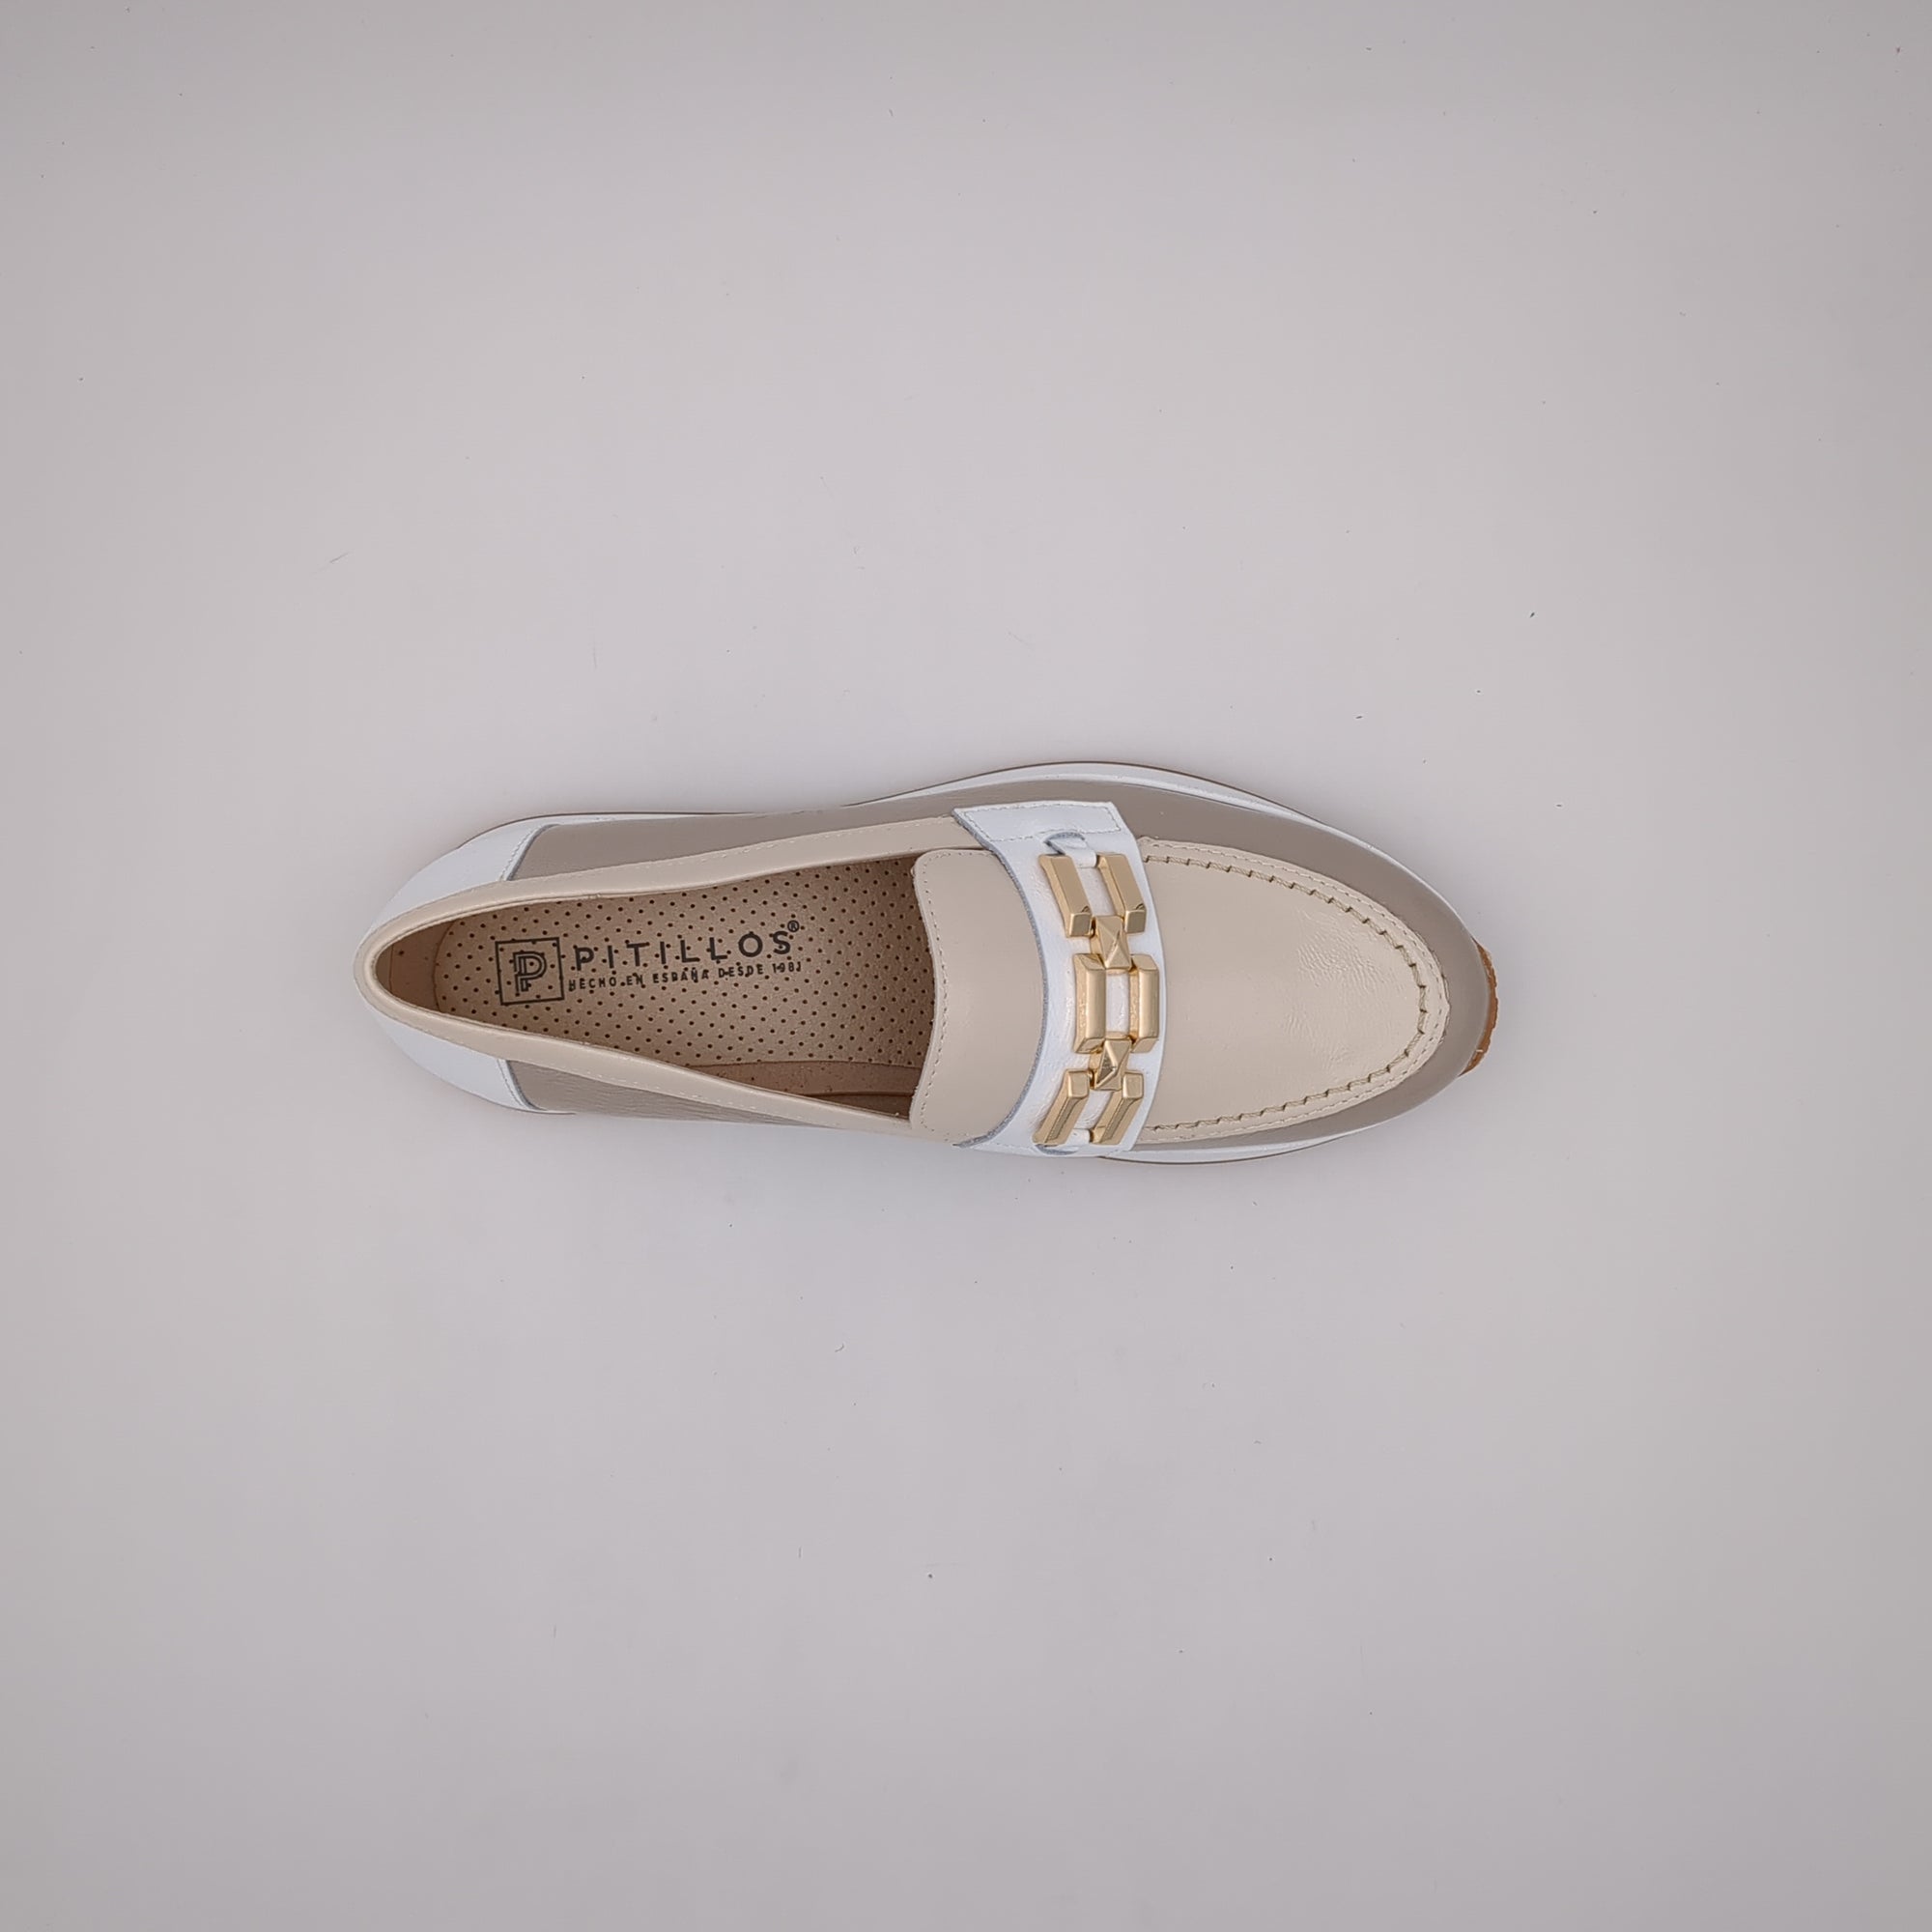 Pitillos Beige Loafer with Taupe Accents and Modern Sole